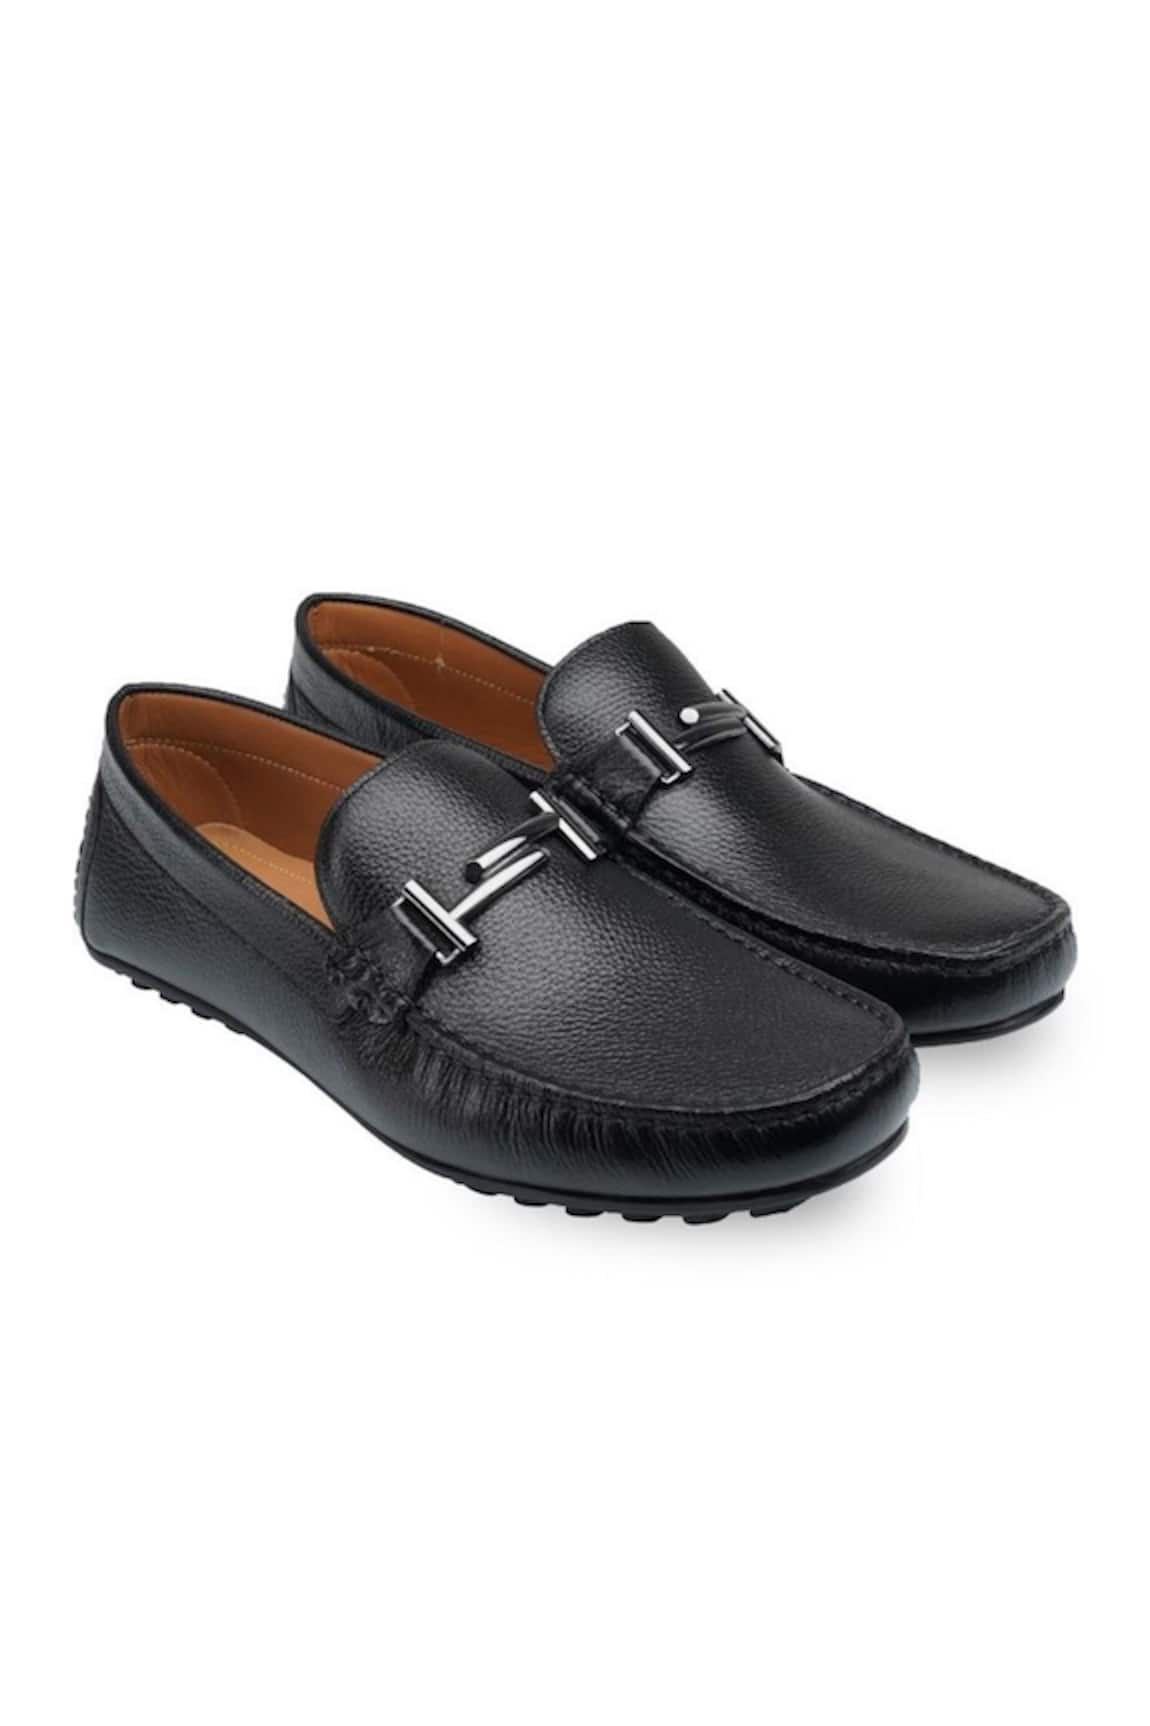 Rapawalk Handcrafted T-Buckle Moccasins Loafers